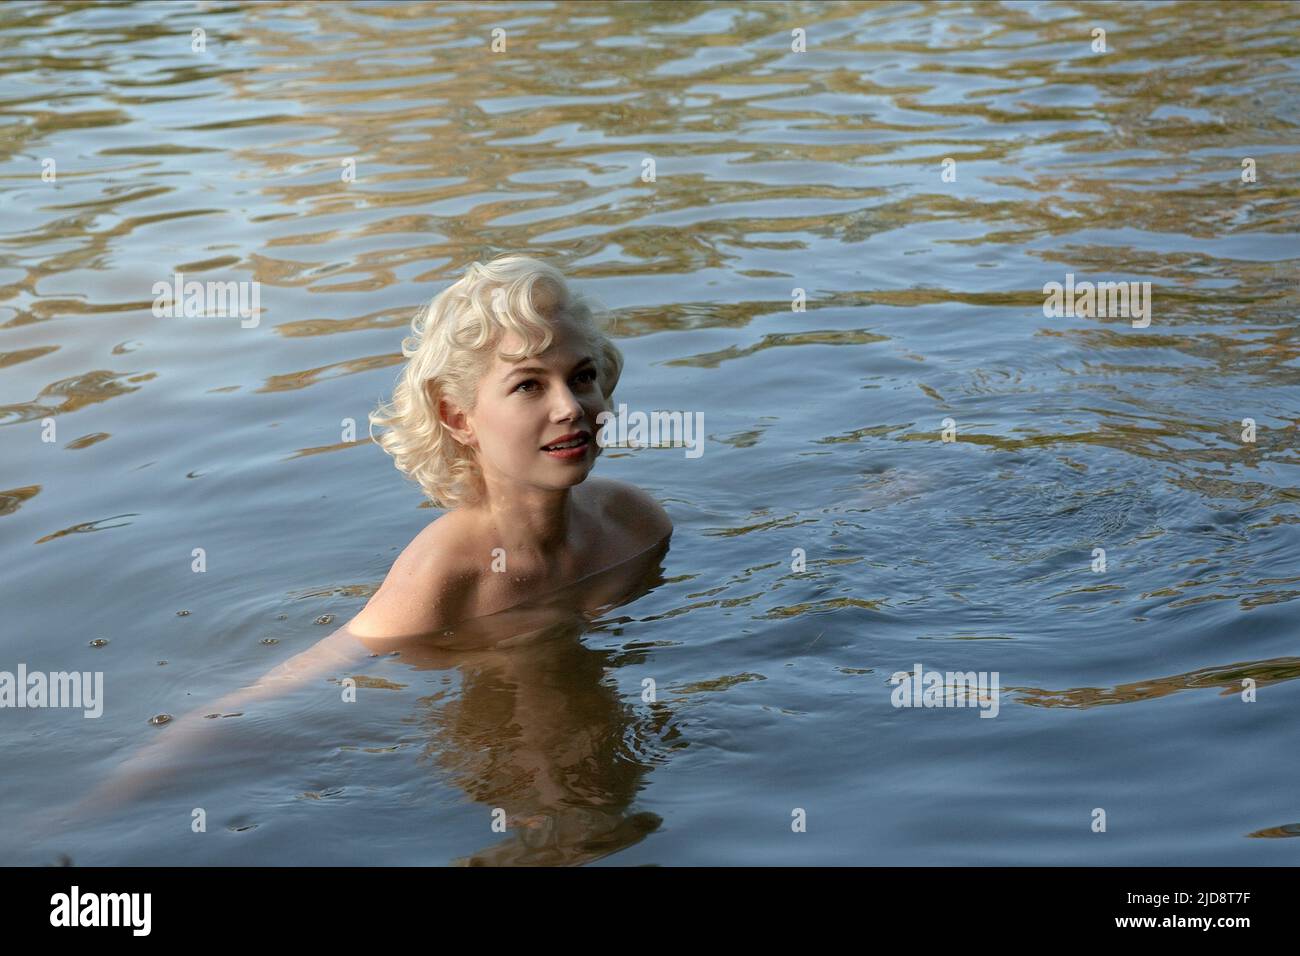 MICHELLE WILLIAMS, MY WEEK WITH MARILYN, 2011, Stock Photo